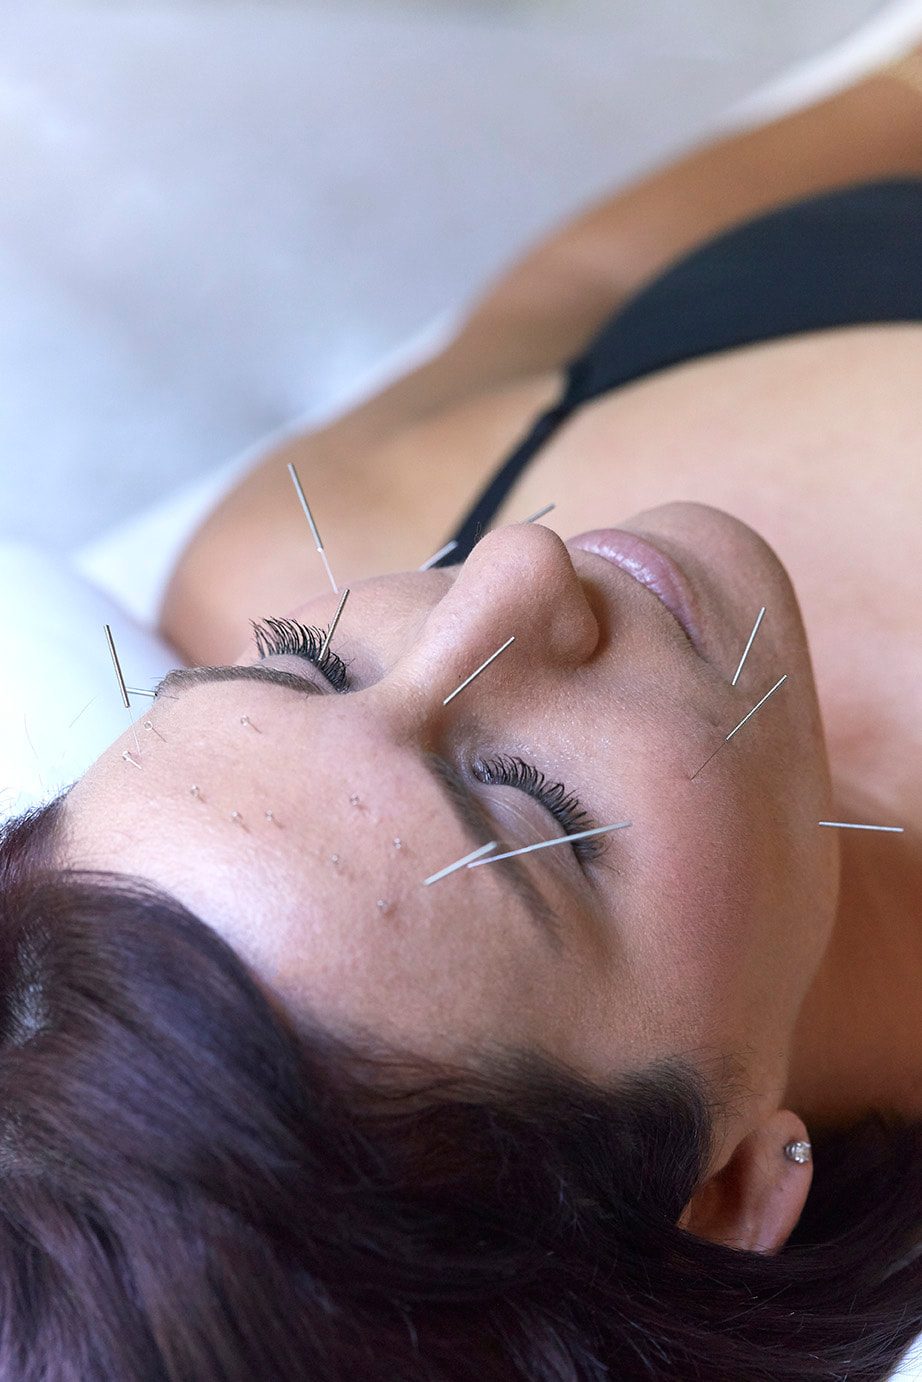 Cosmetic Facial Acupuncture with Dr Kim Peirano San Rafael CA Cosmetic Facial Acupuncture Treatment with Needles